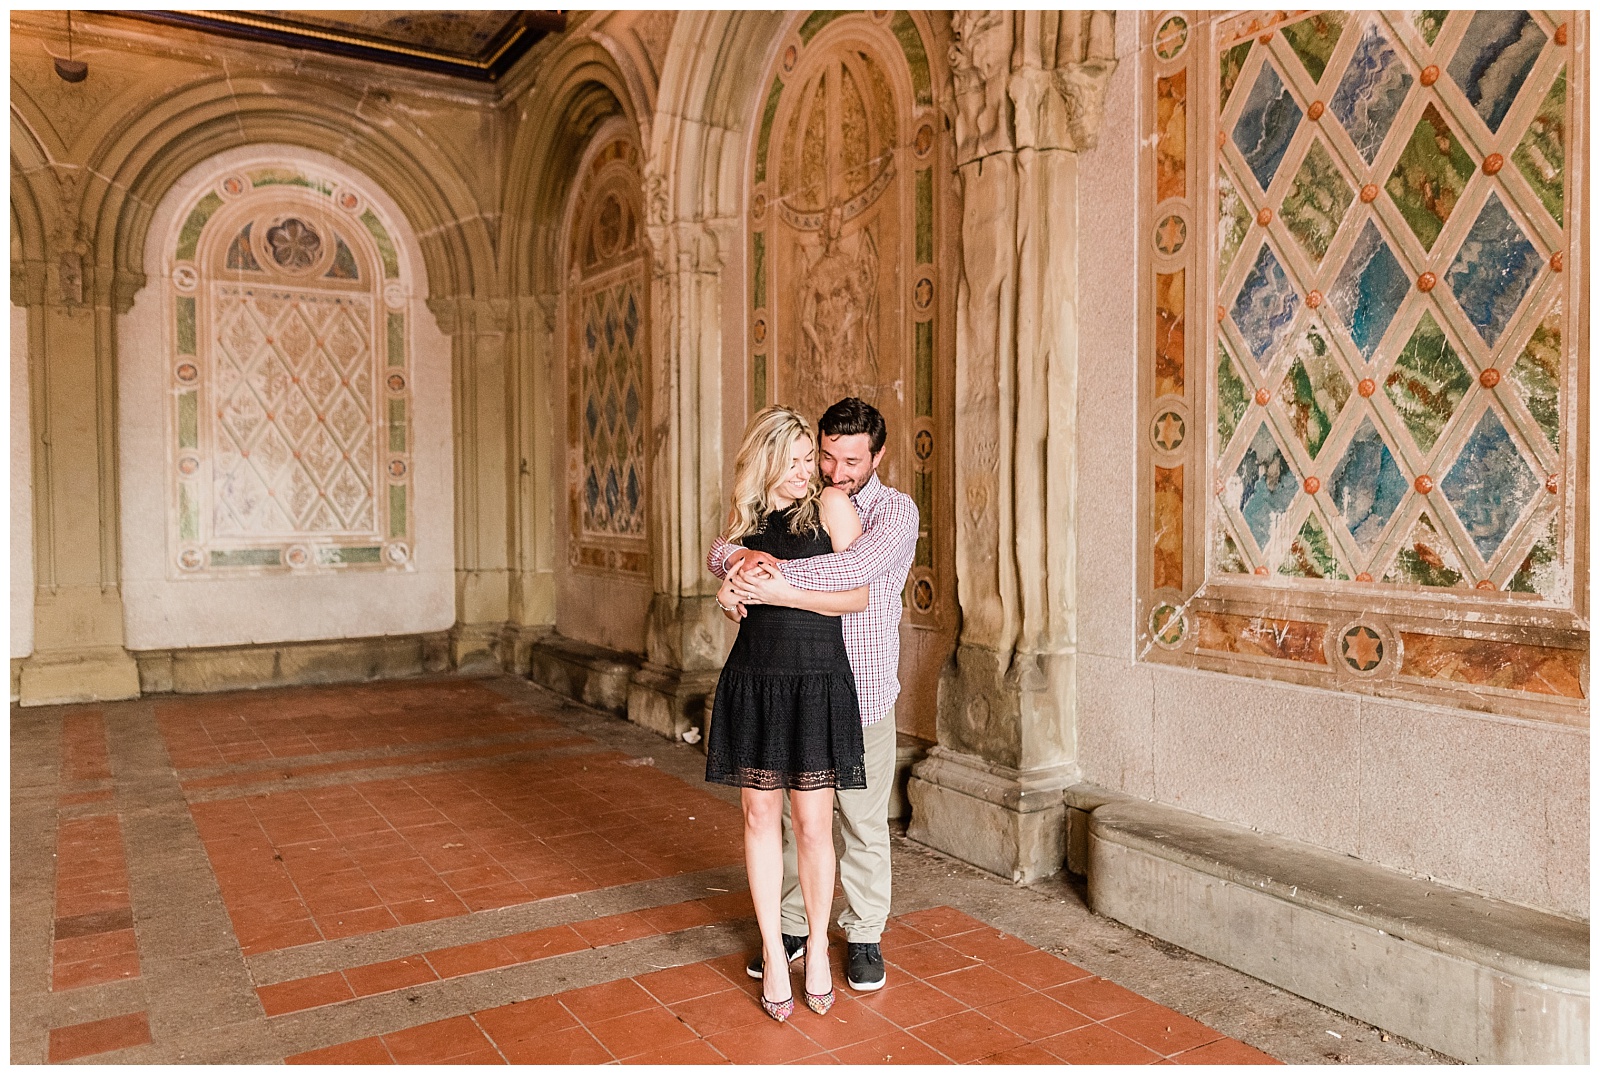 A man holds his fiance from behind in Bethesda Terrace at Central Park, New York.